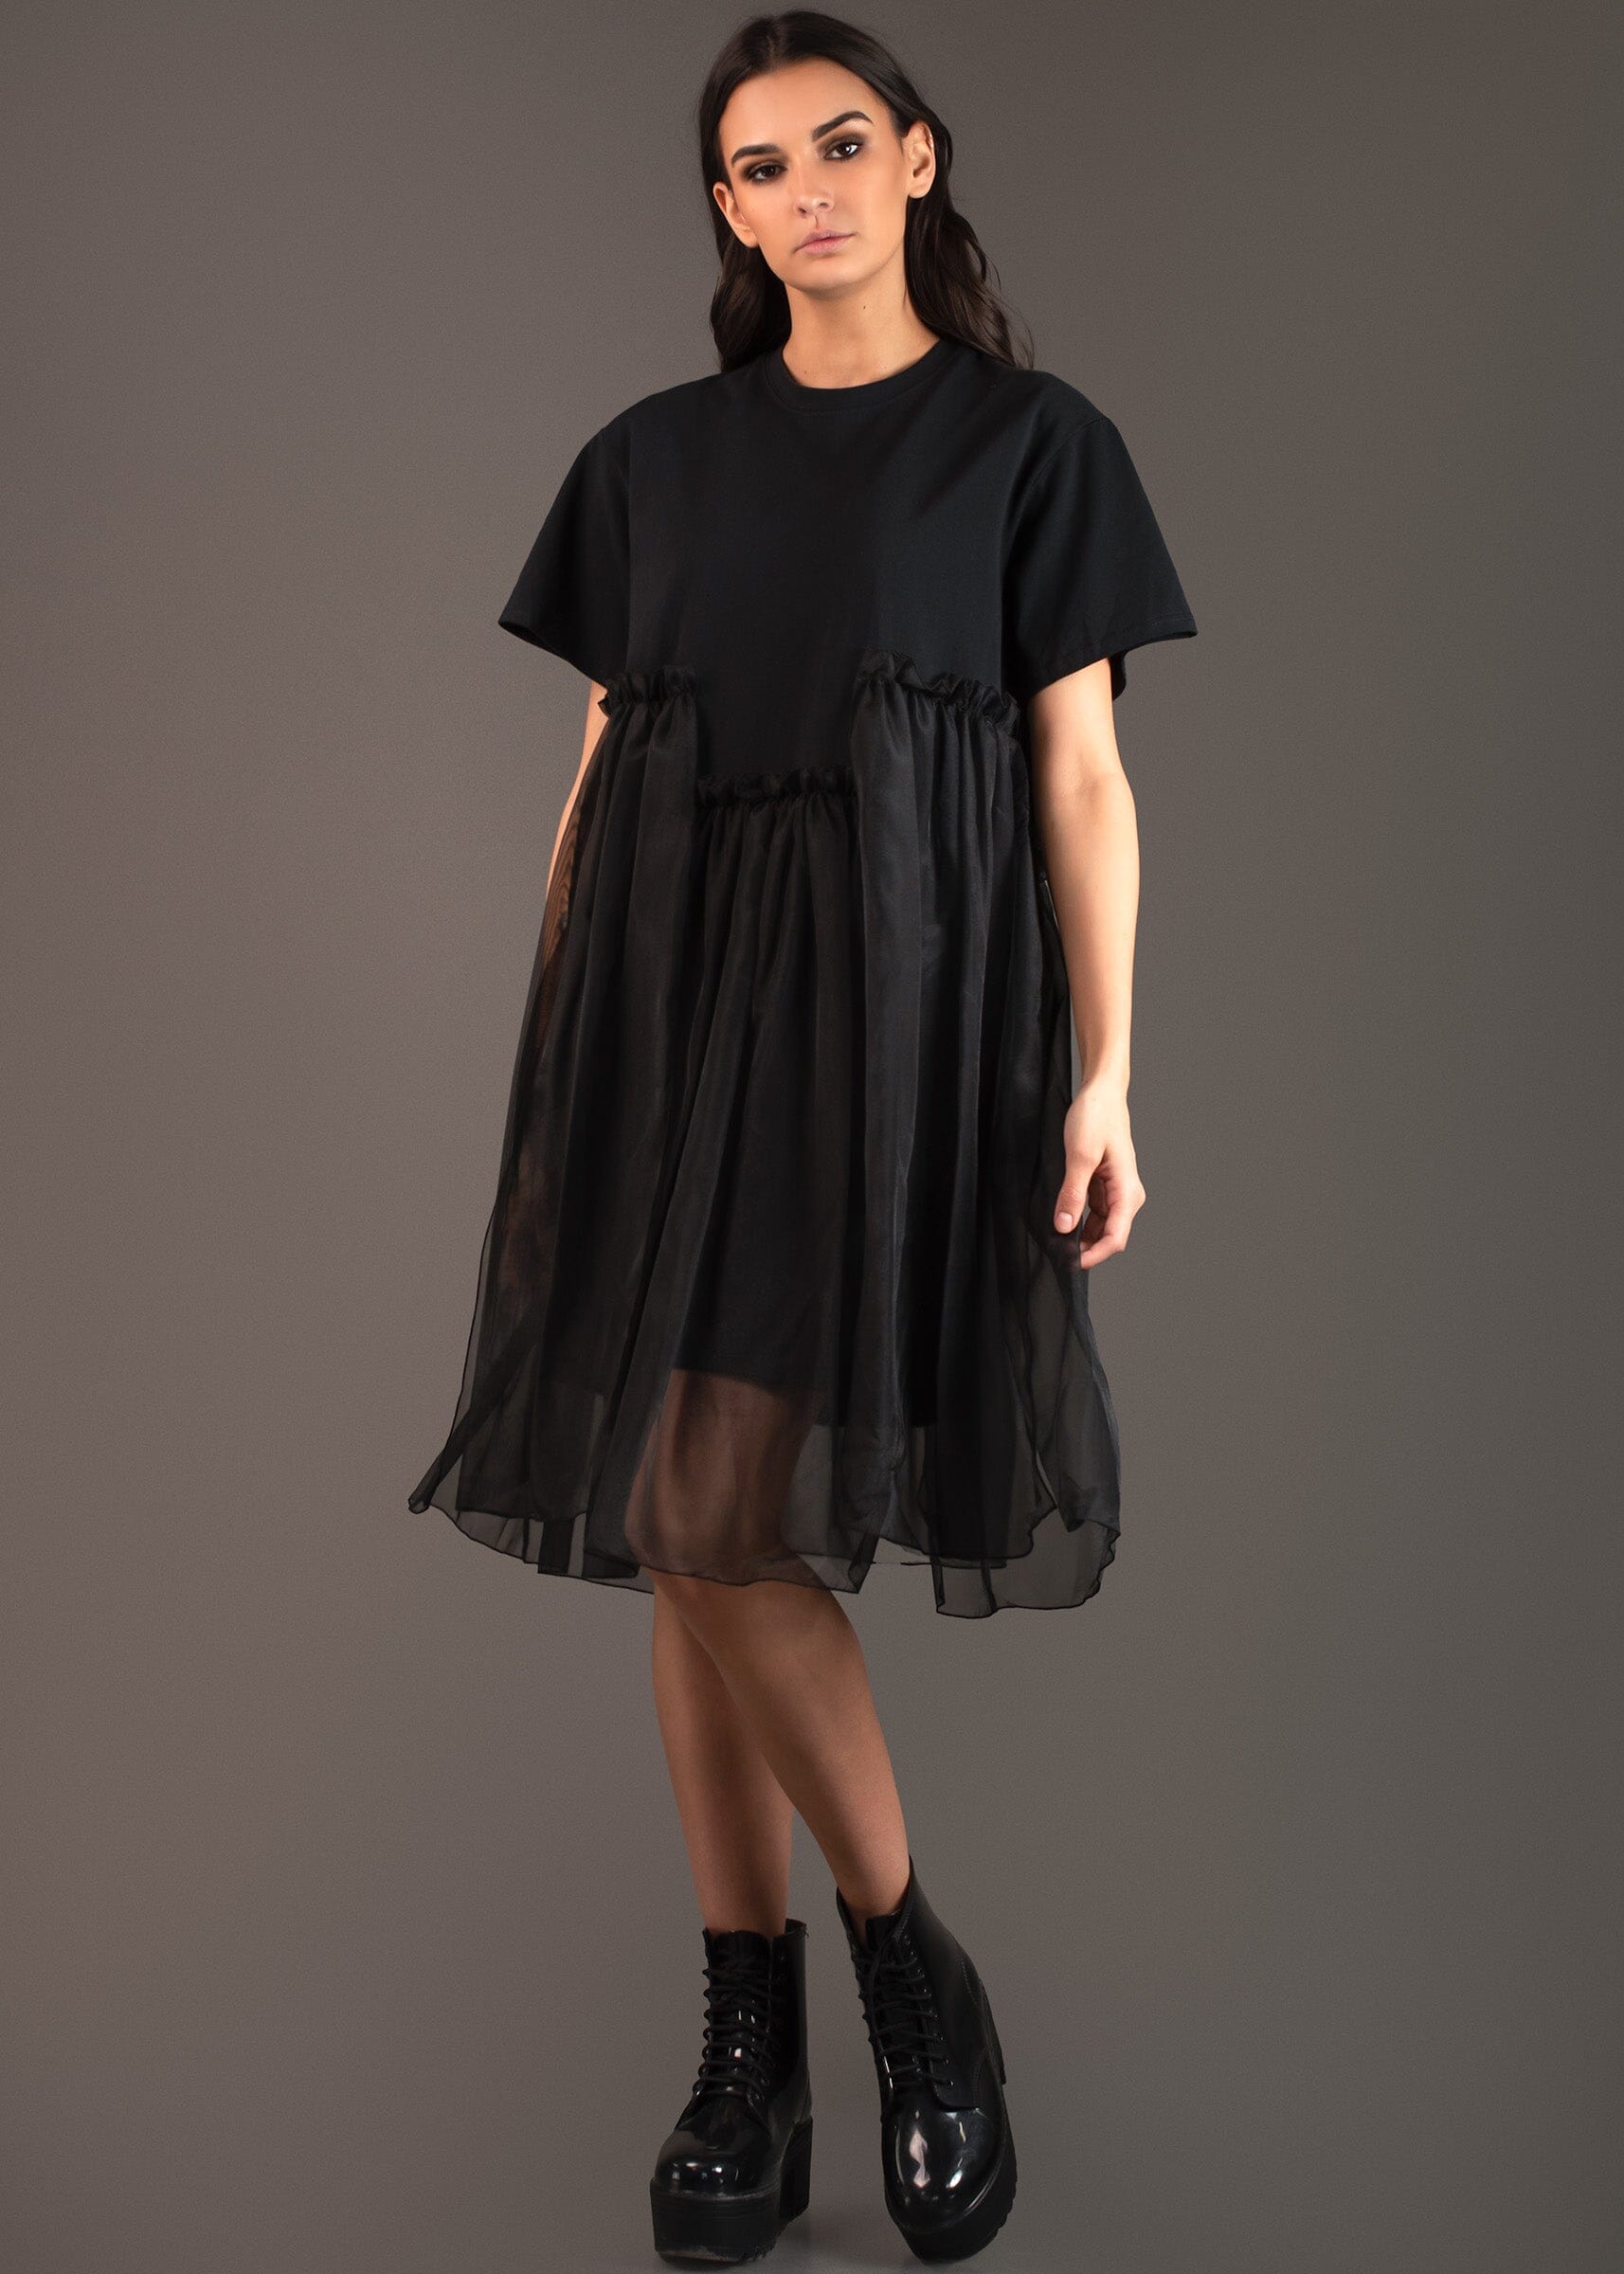 Baby Doll Tulle Tee Dress Dresses Kate Hewko Black One Size 